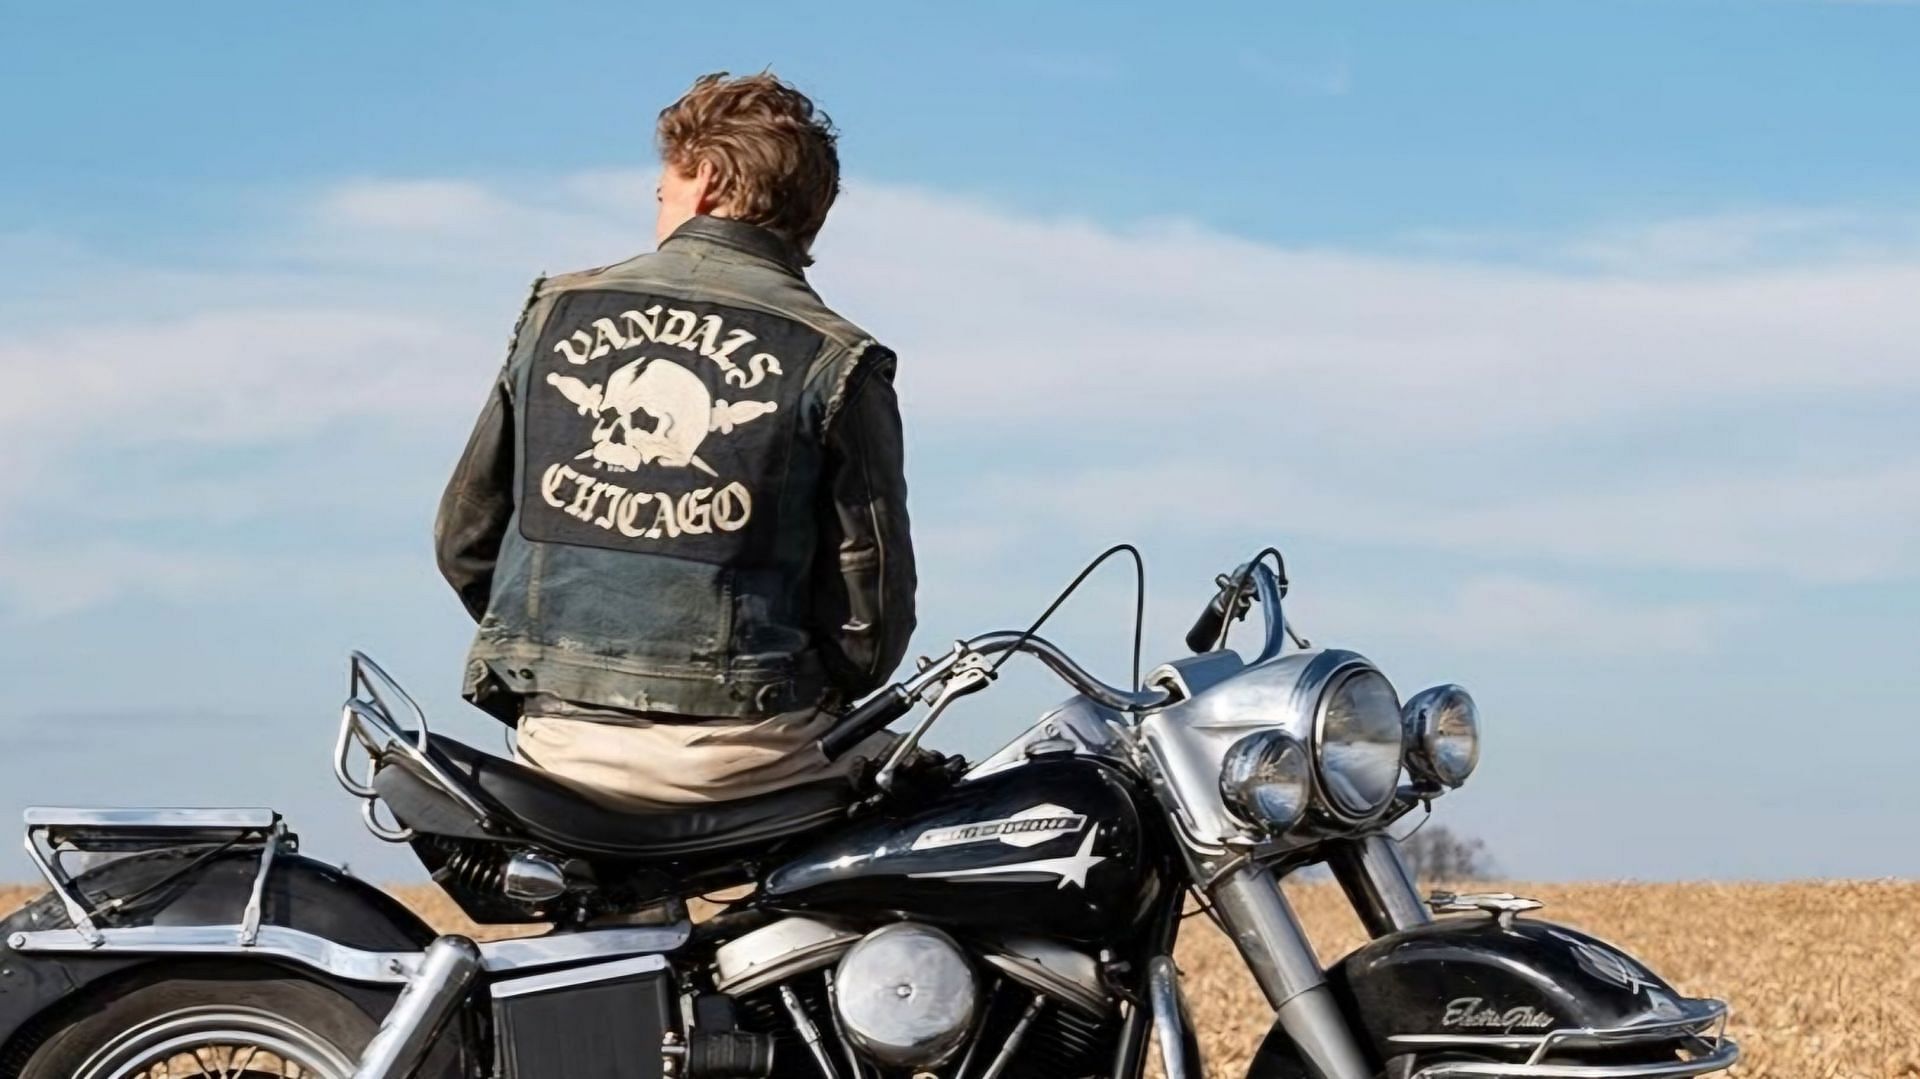 A still from The Bikeriders